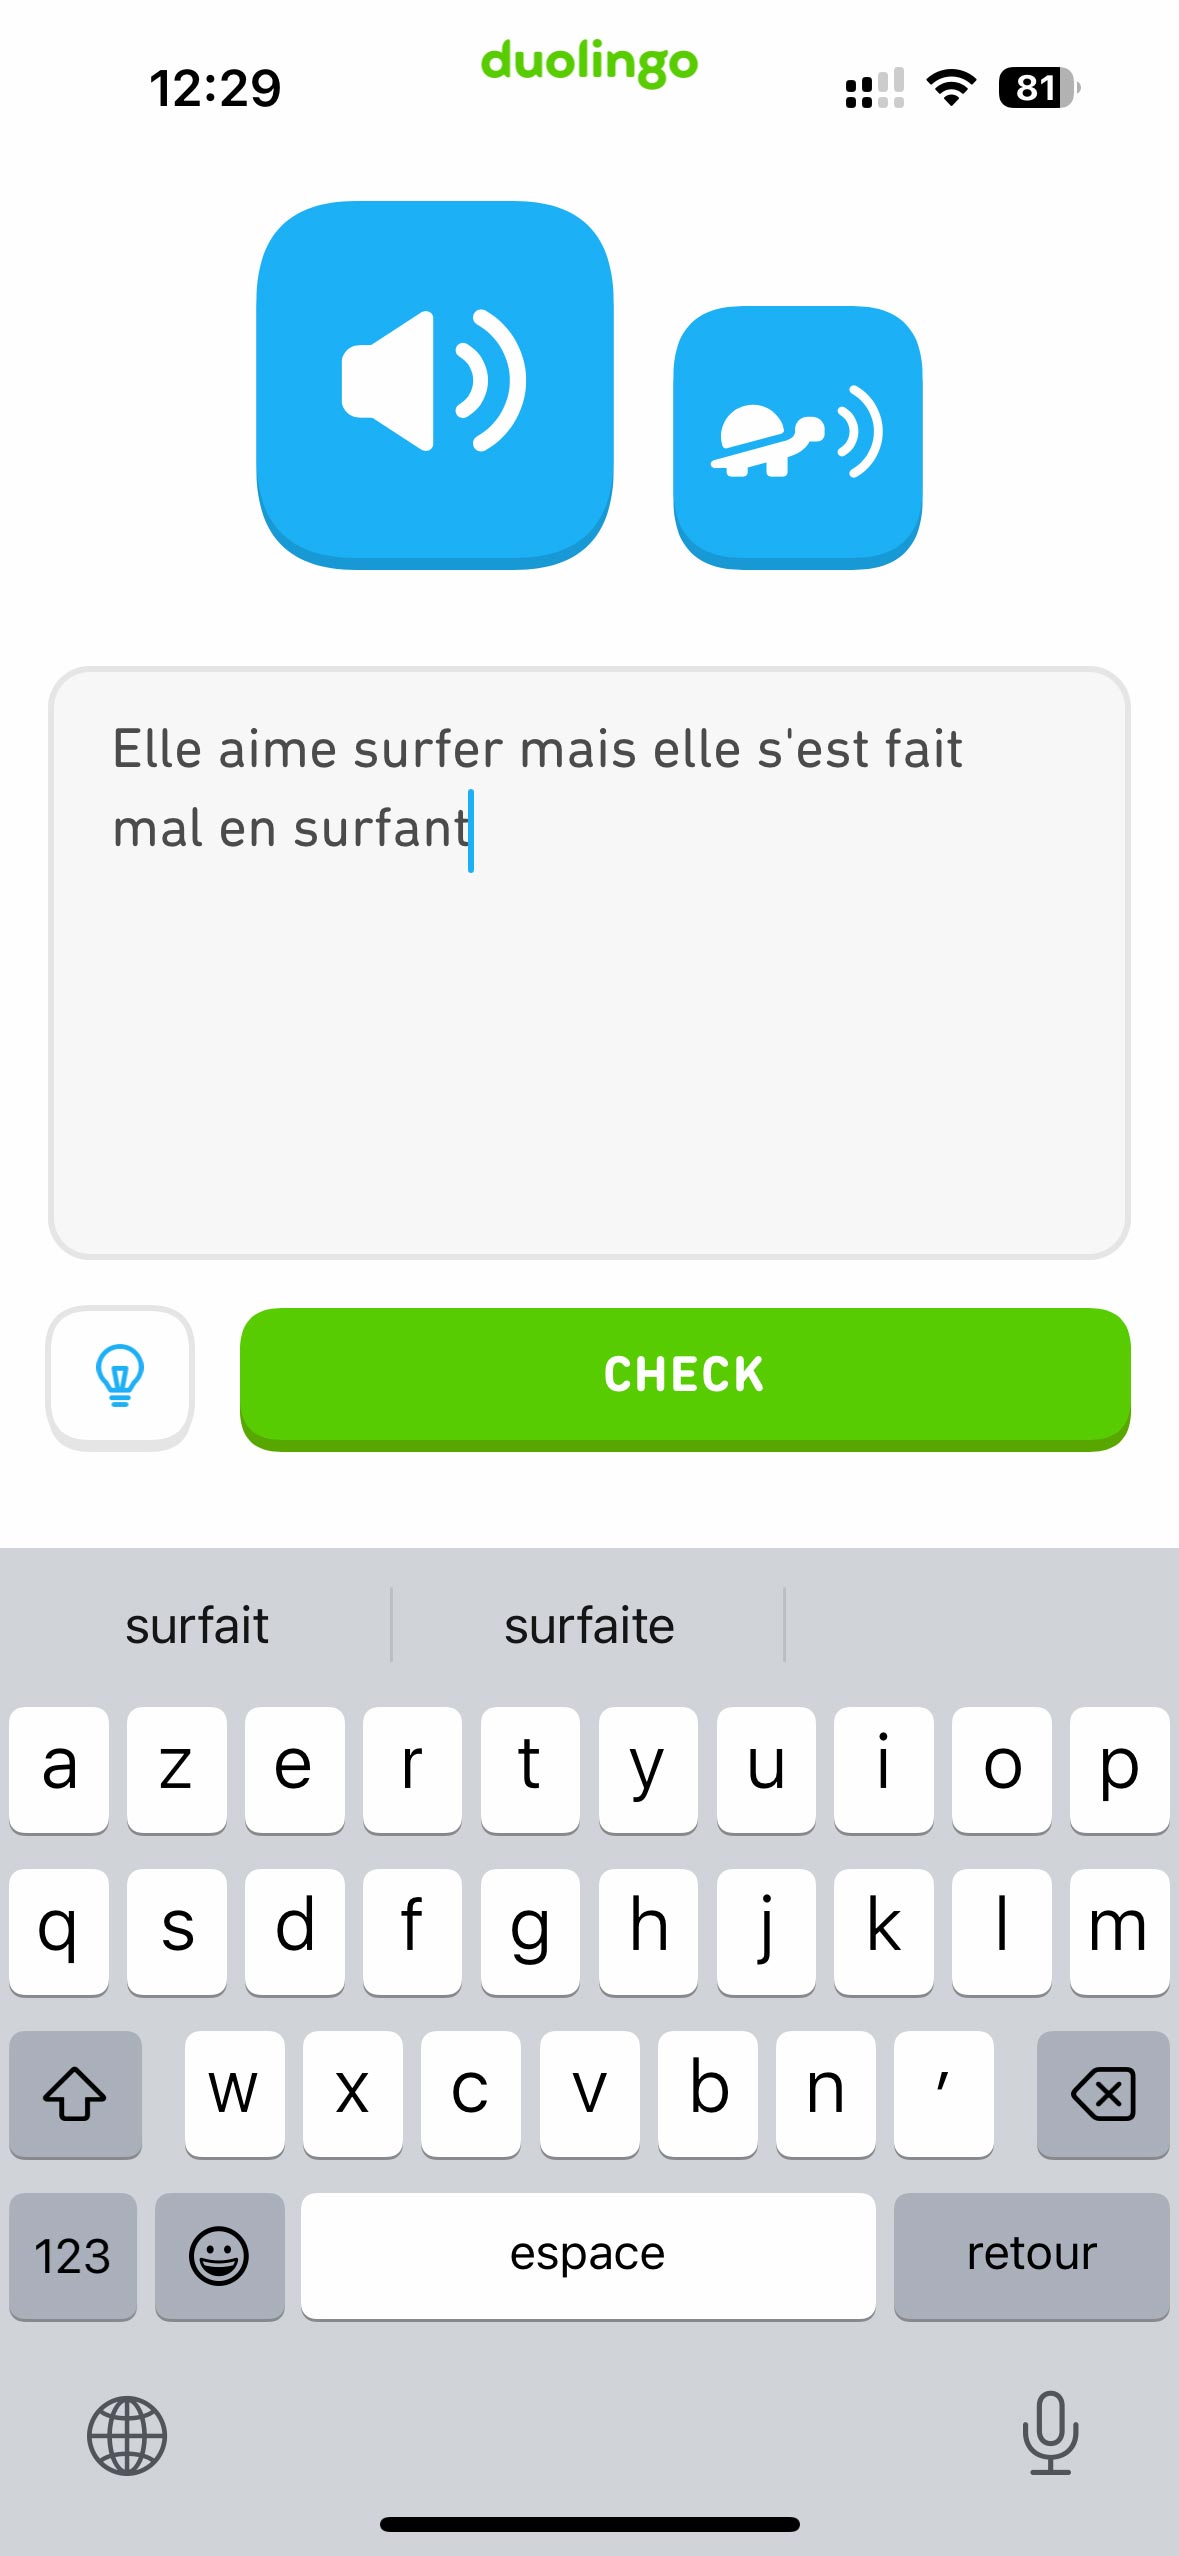 Screenshot of a Duolingo listening exercise, in which users listen to an audio recording in their target language and then answer a related question or transcribe the spoken phrase, fostering listening comprehension skills.